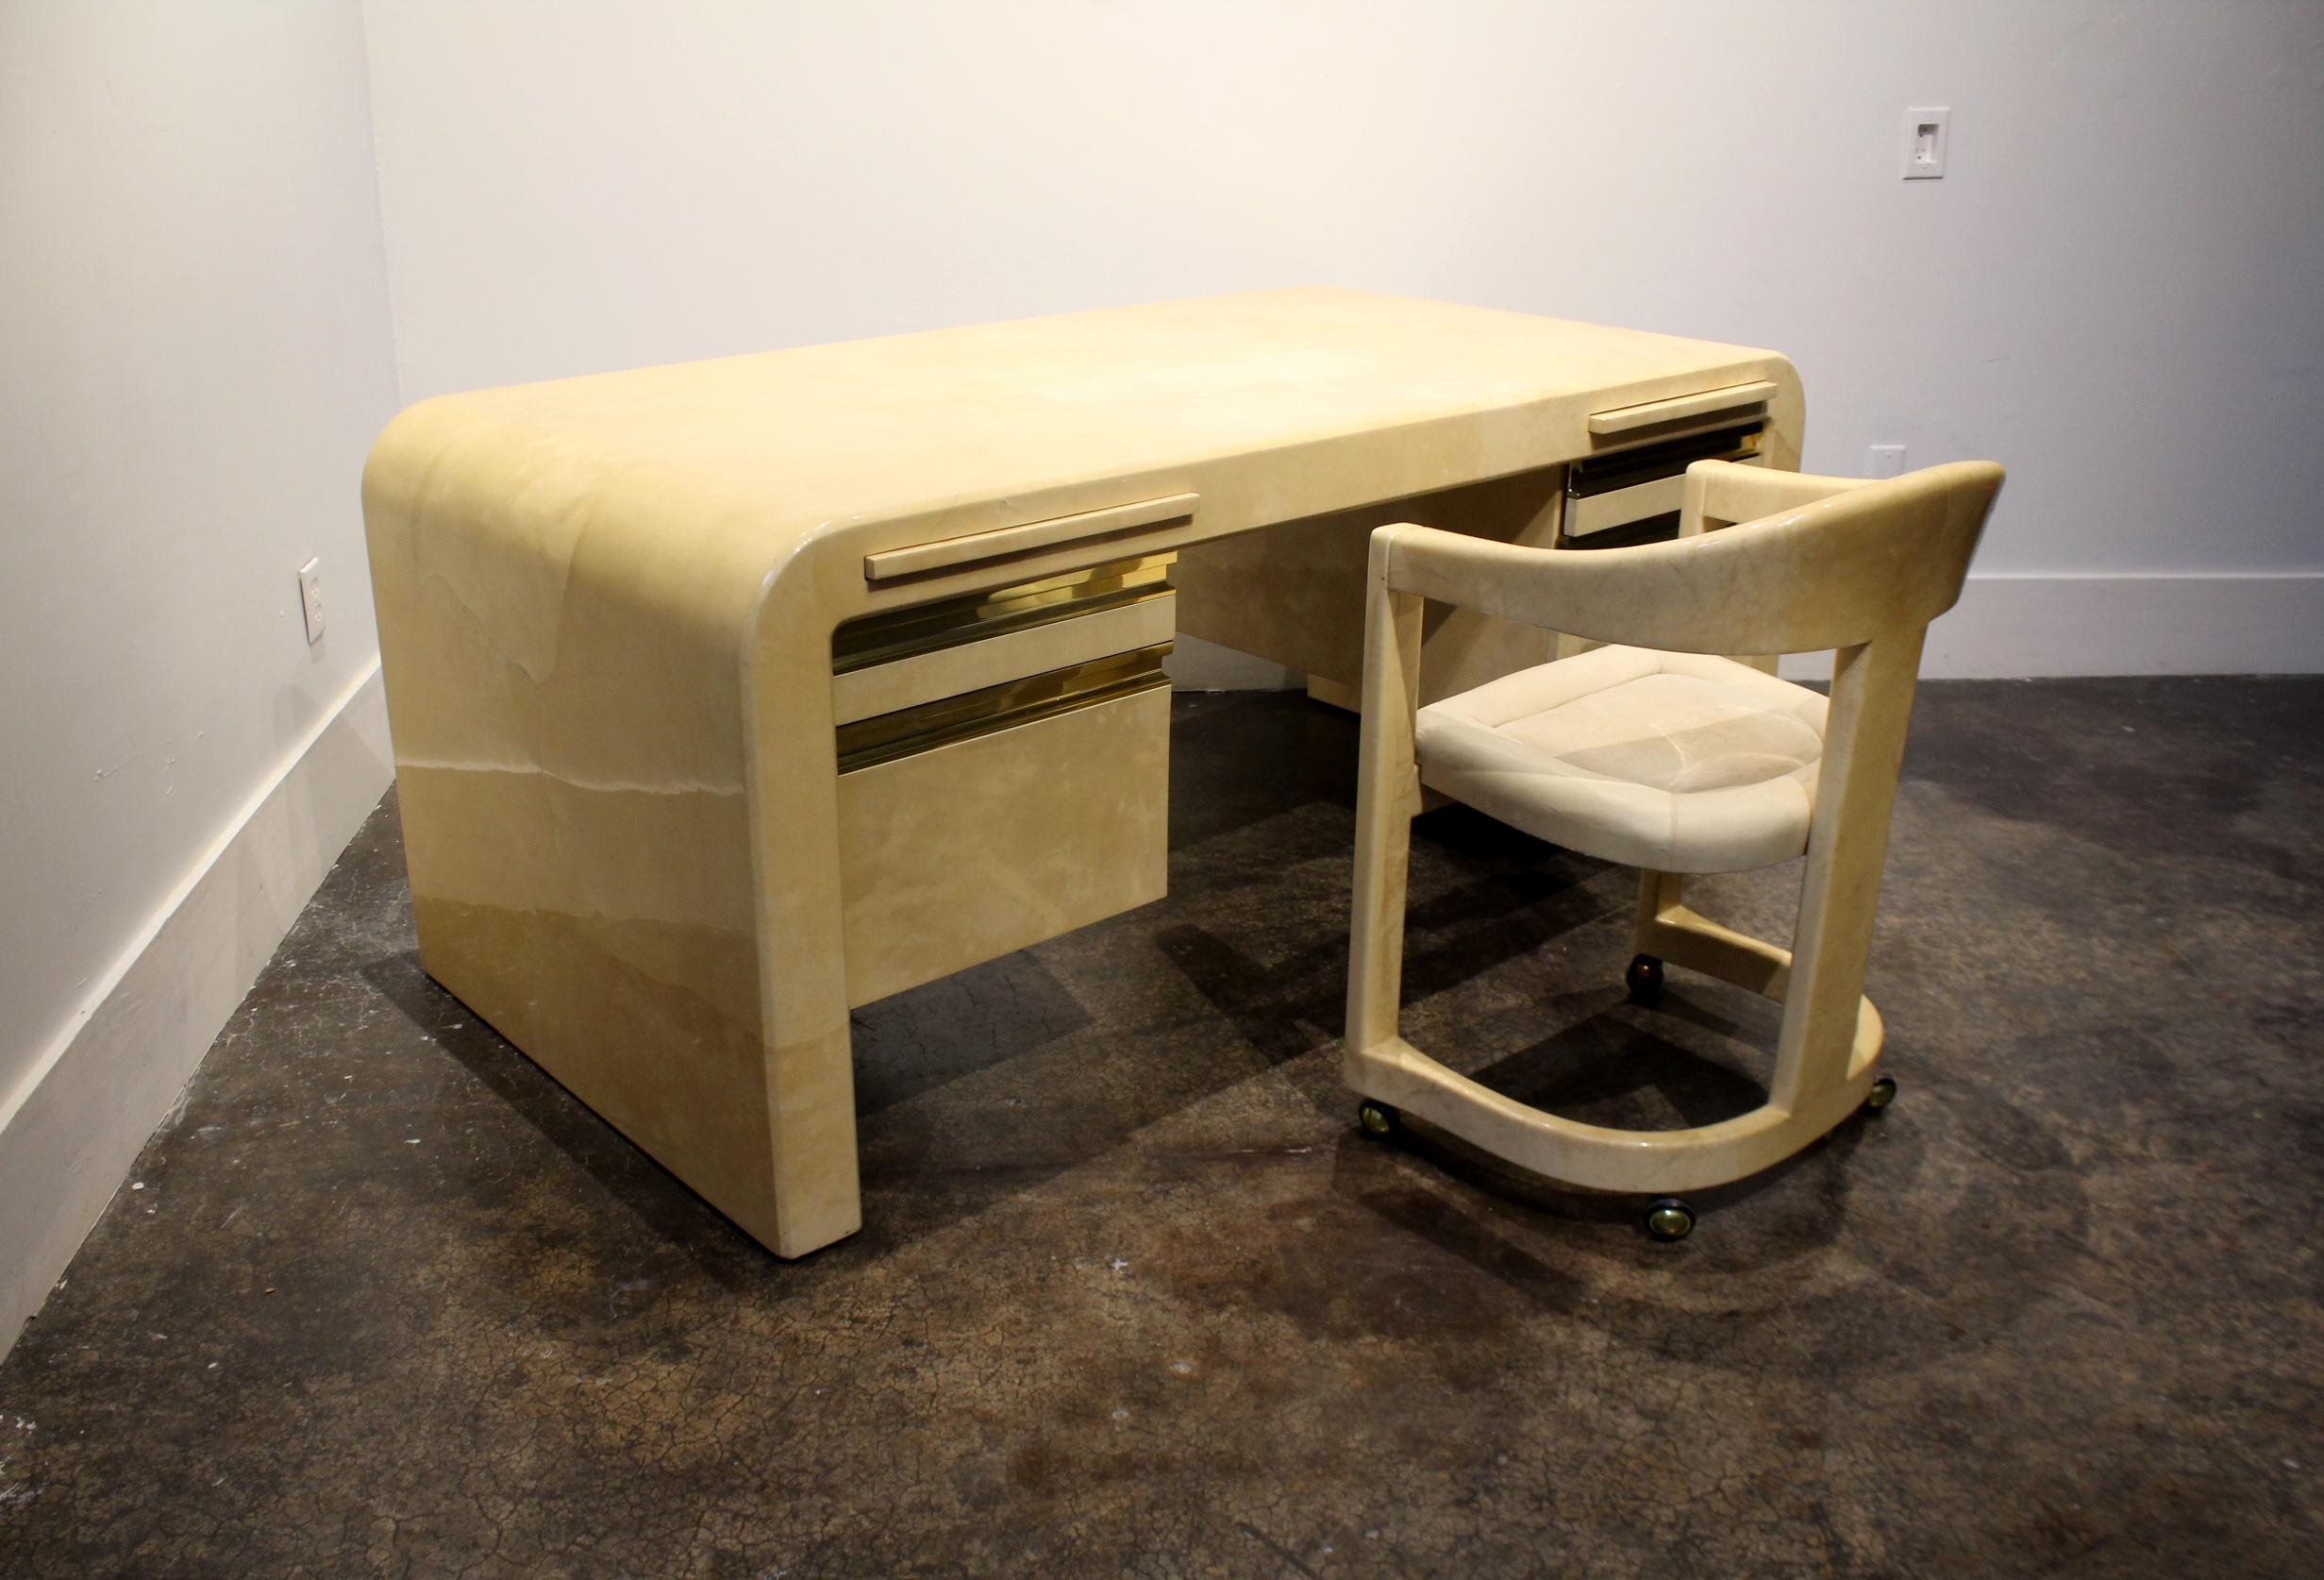 Large waterfall style desk designed and manufactured by Karl Springer in the 1970s. Whitish-tan, lacquered goatskin with gold pulls. Desk has two small top drawers, two large bottom drawers and two pull-out writing surfaces over the drawers. Comes